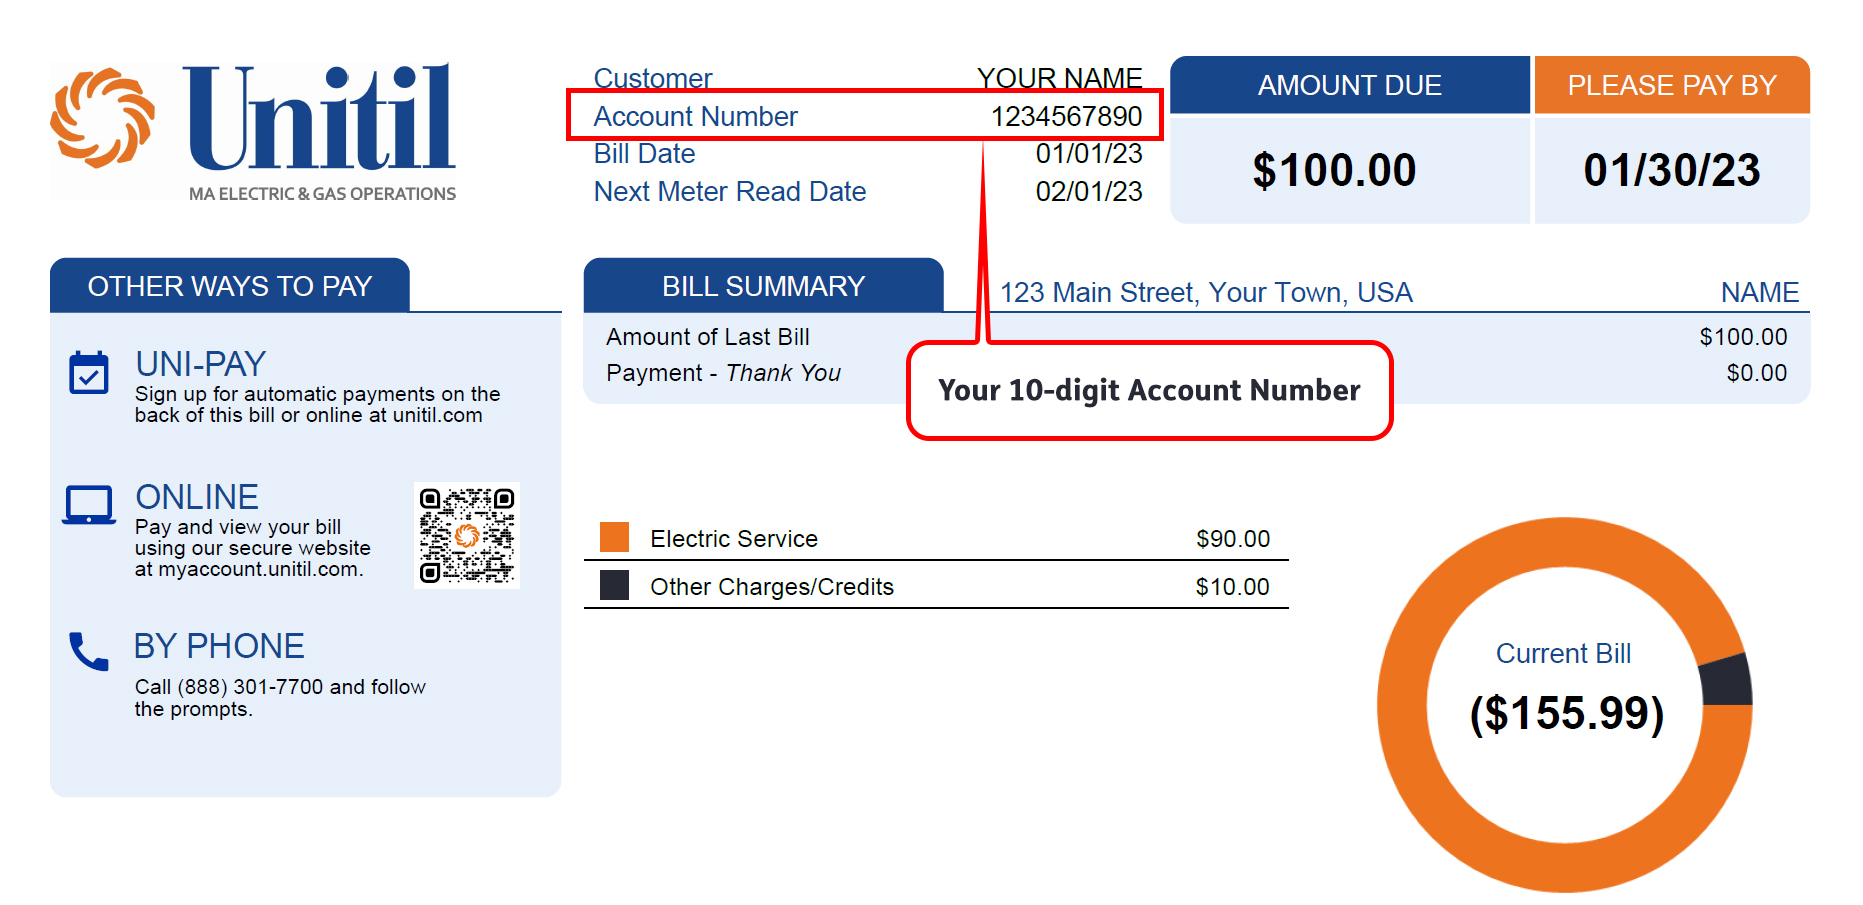 Sample image of bill. You can find your account number on your bill as shown.